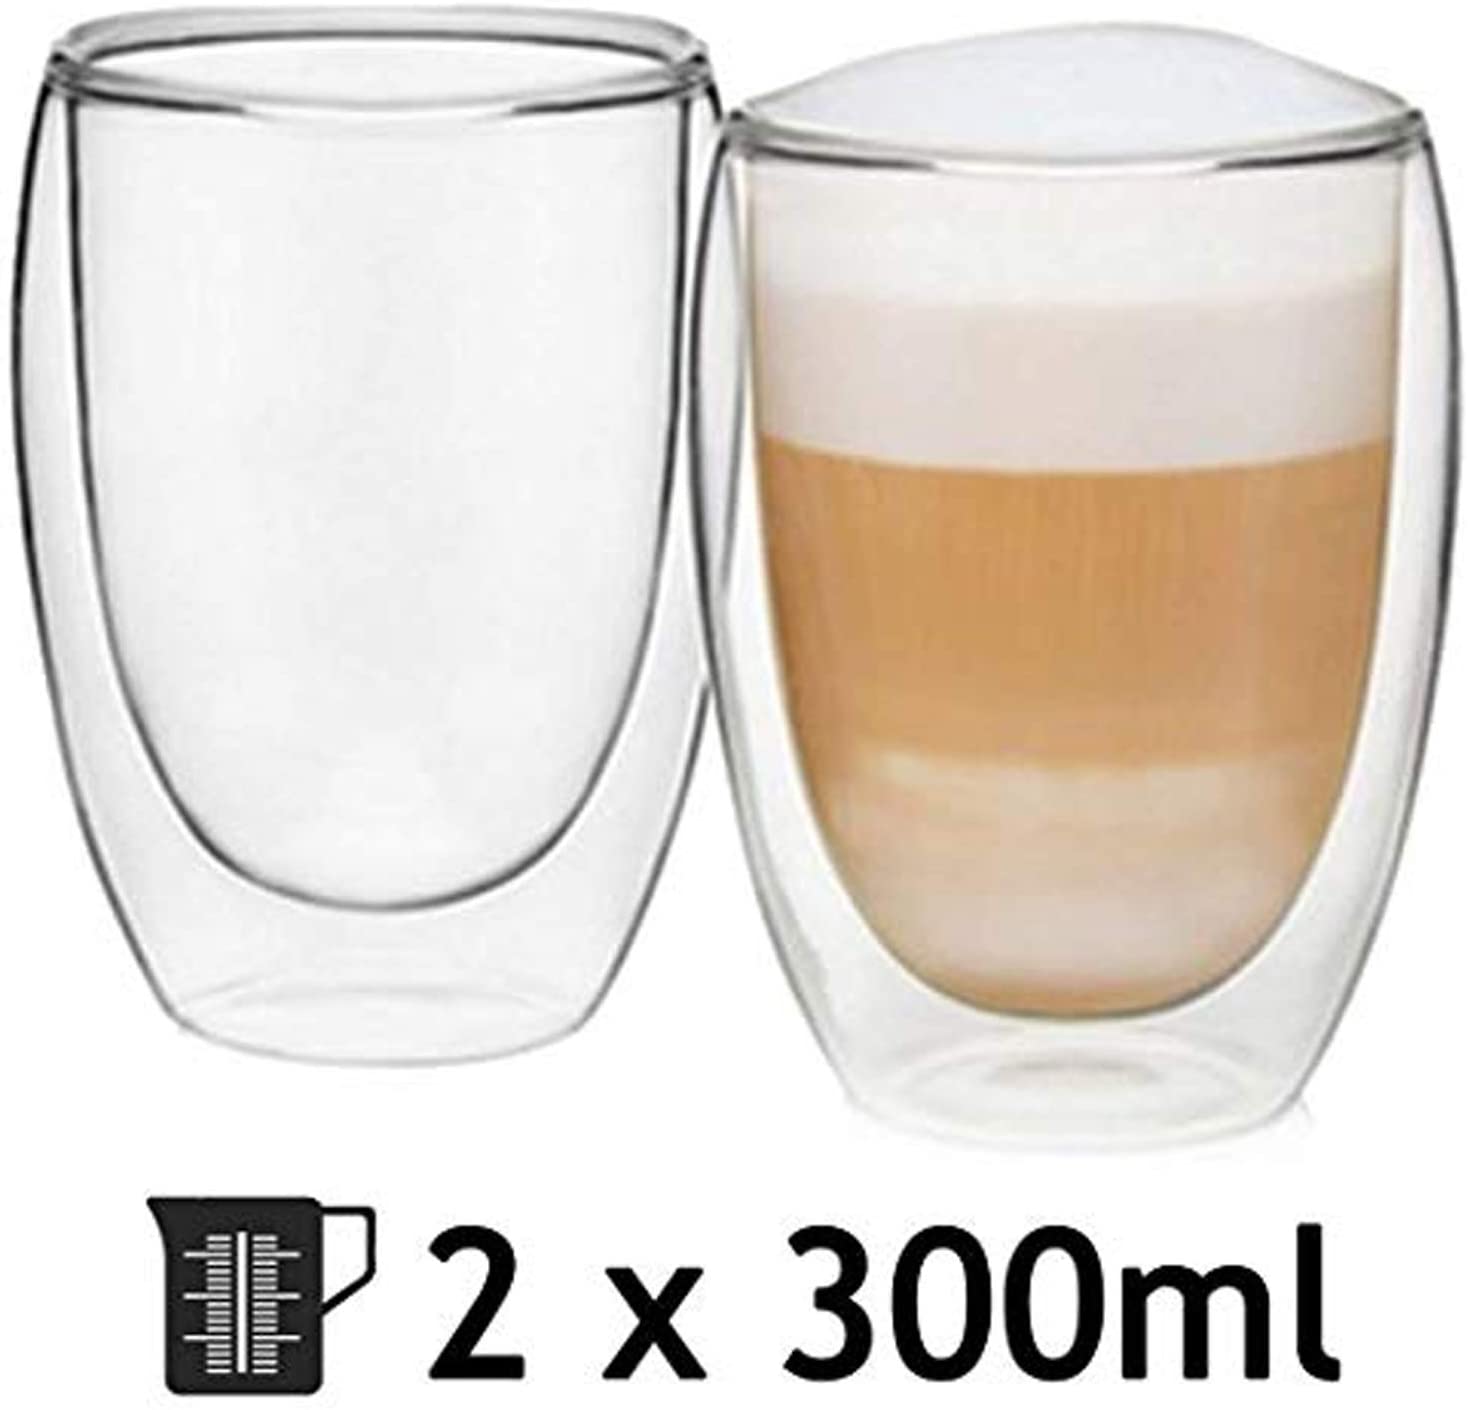 Double Walled Thermal Coffee Glass Tumbler Latte Cappuccino Cup Glasses 300ml x2